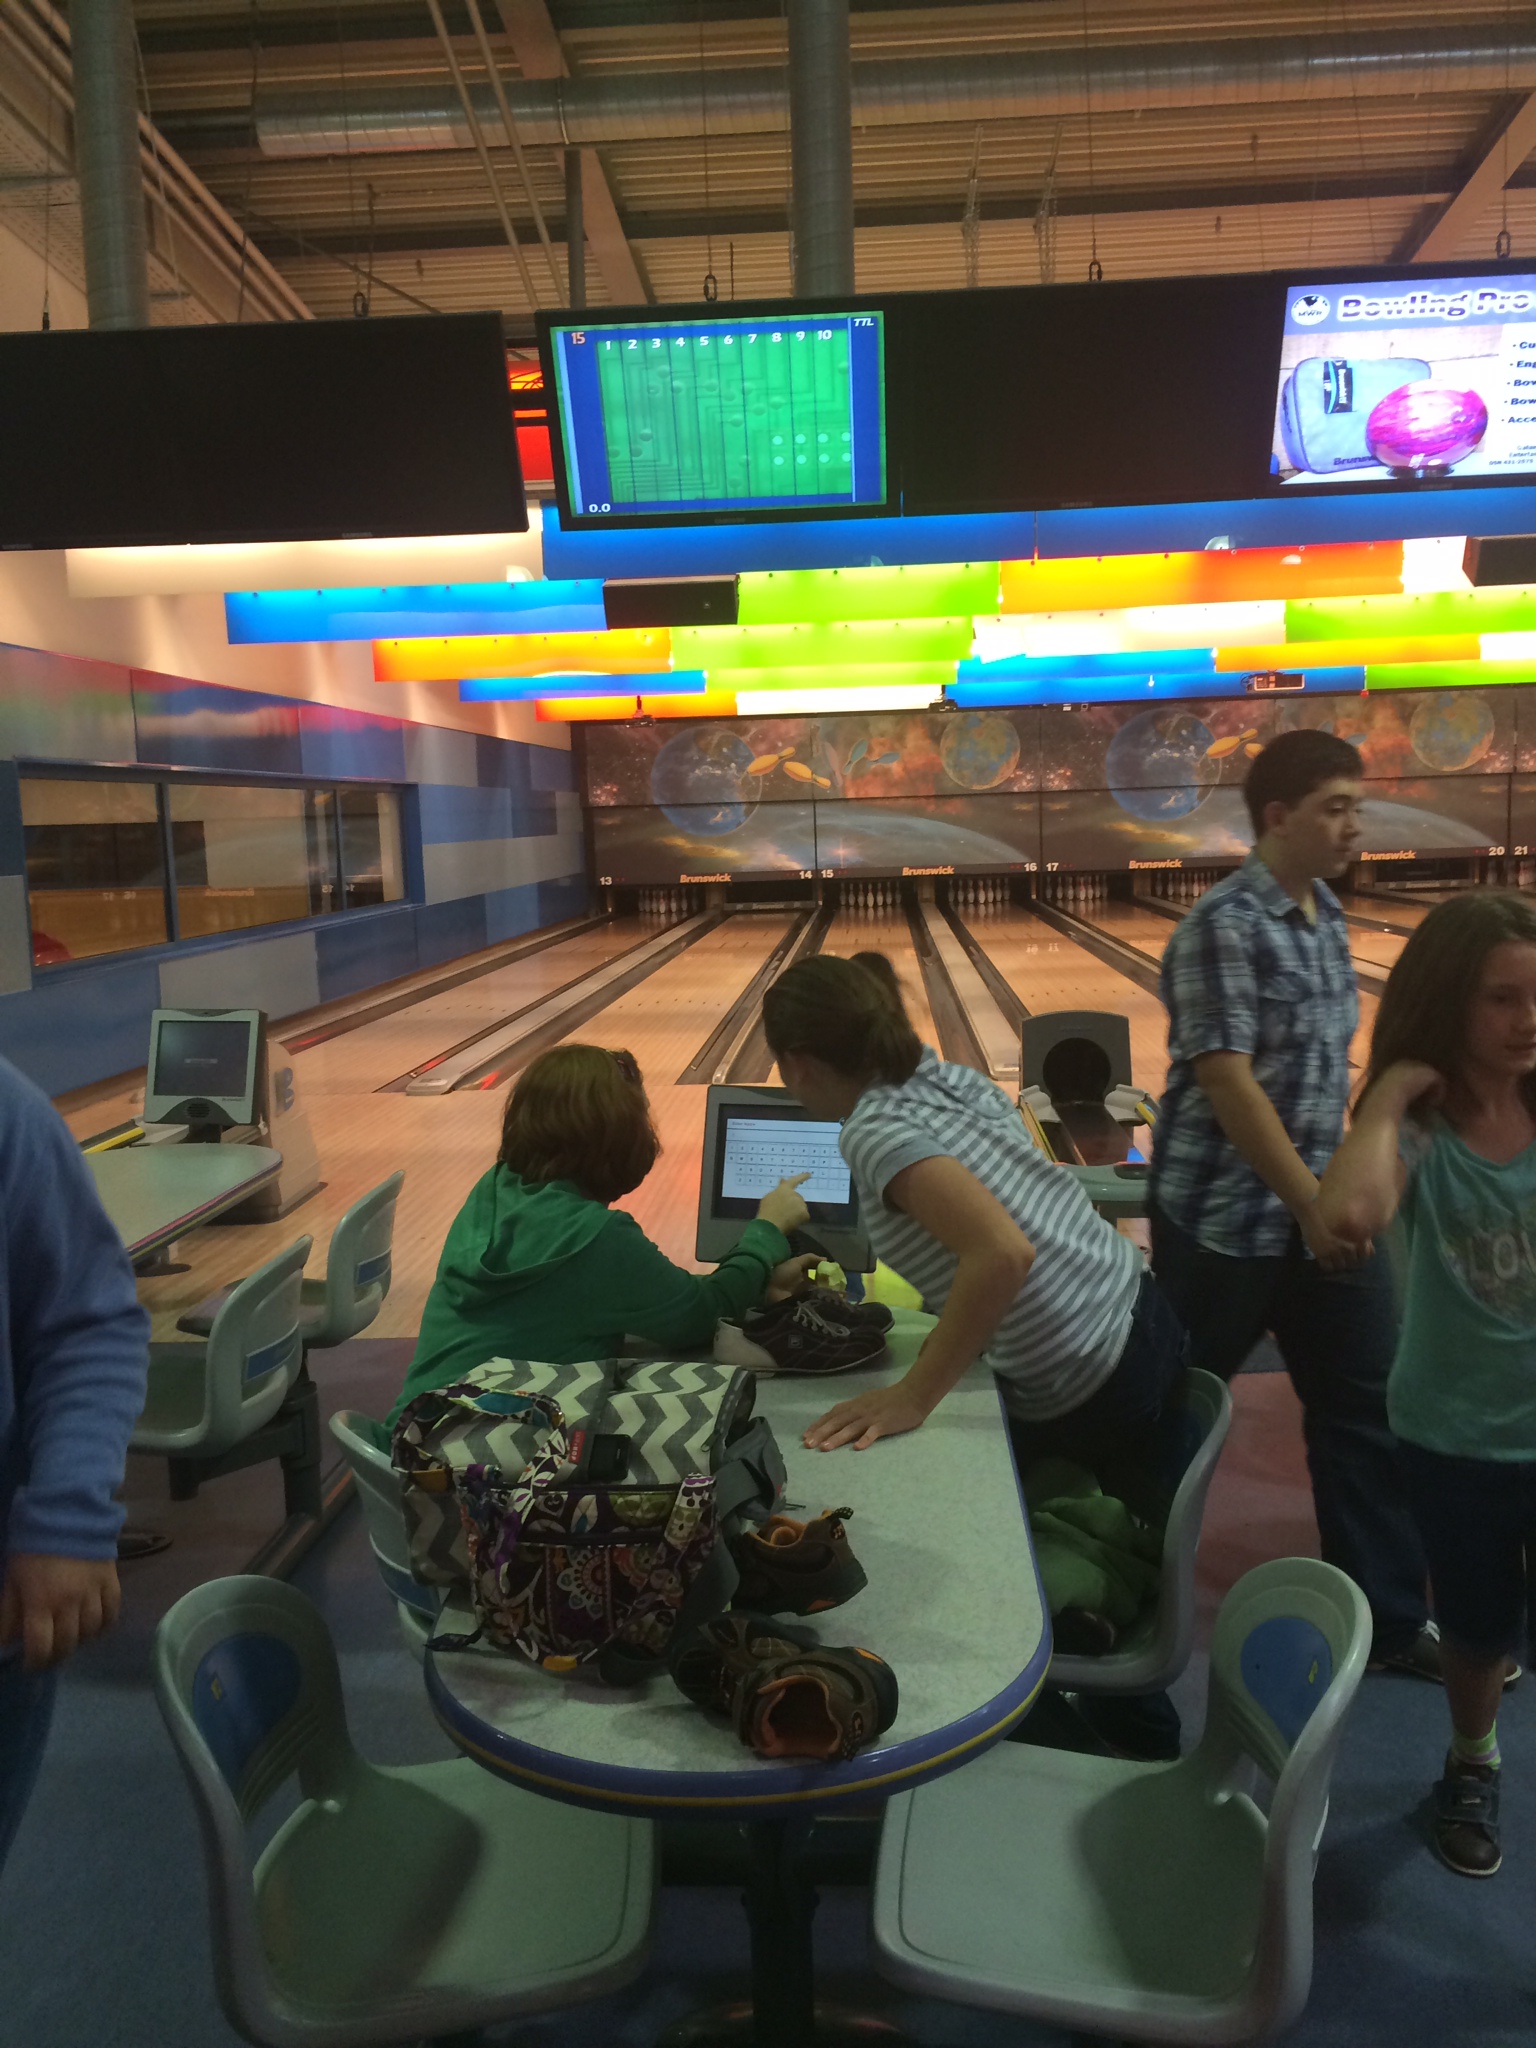 Reflections on our Day homeschooling; and Bowling at Night